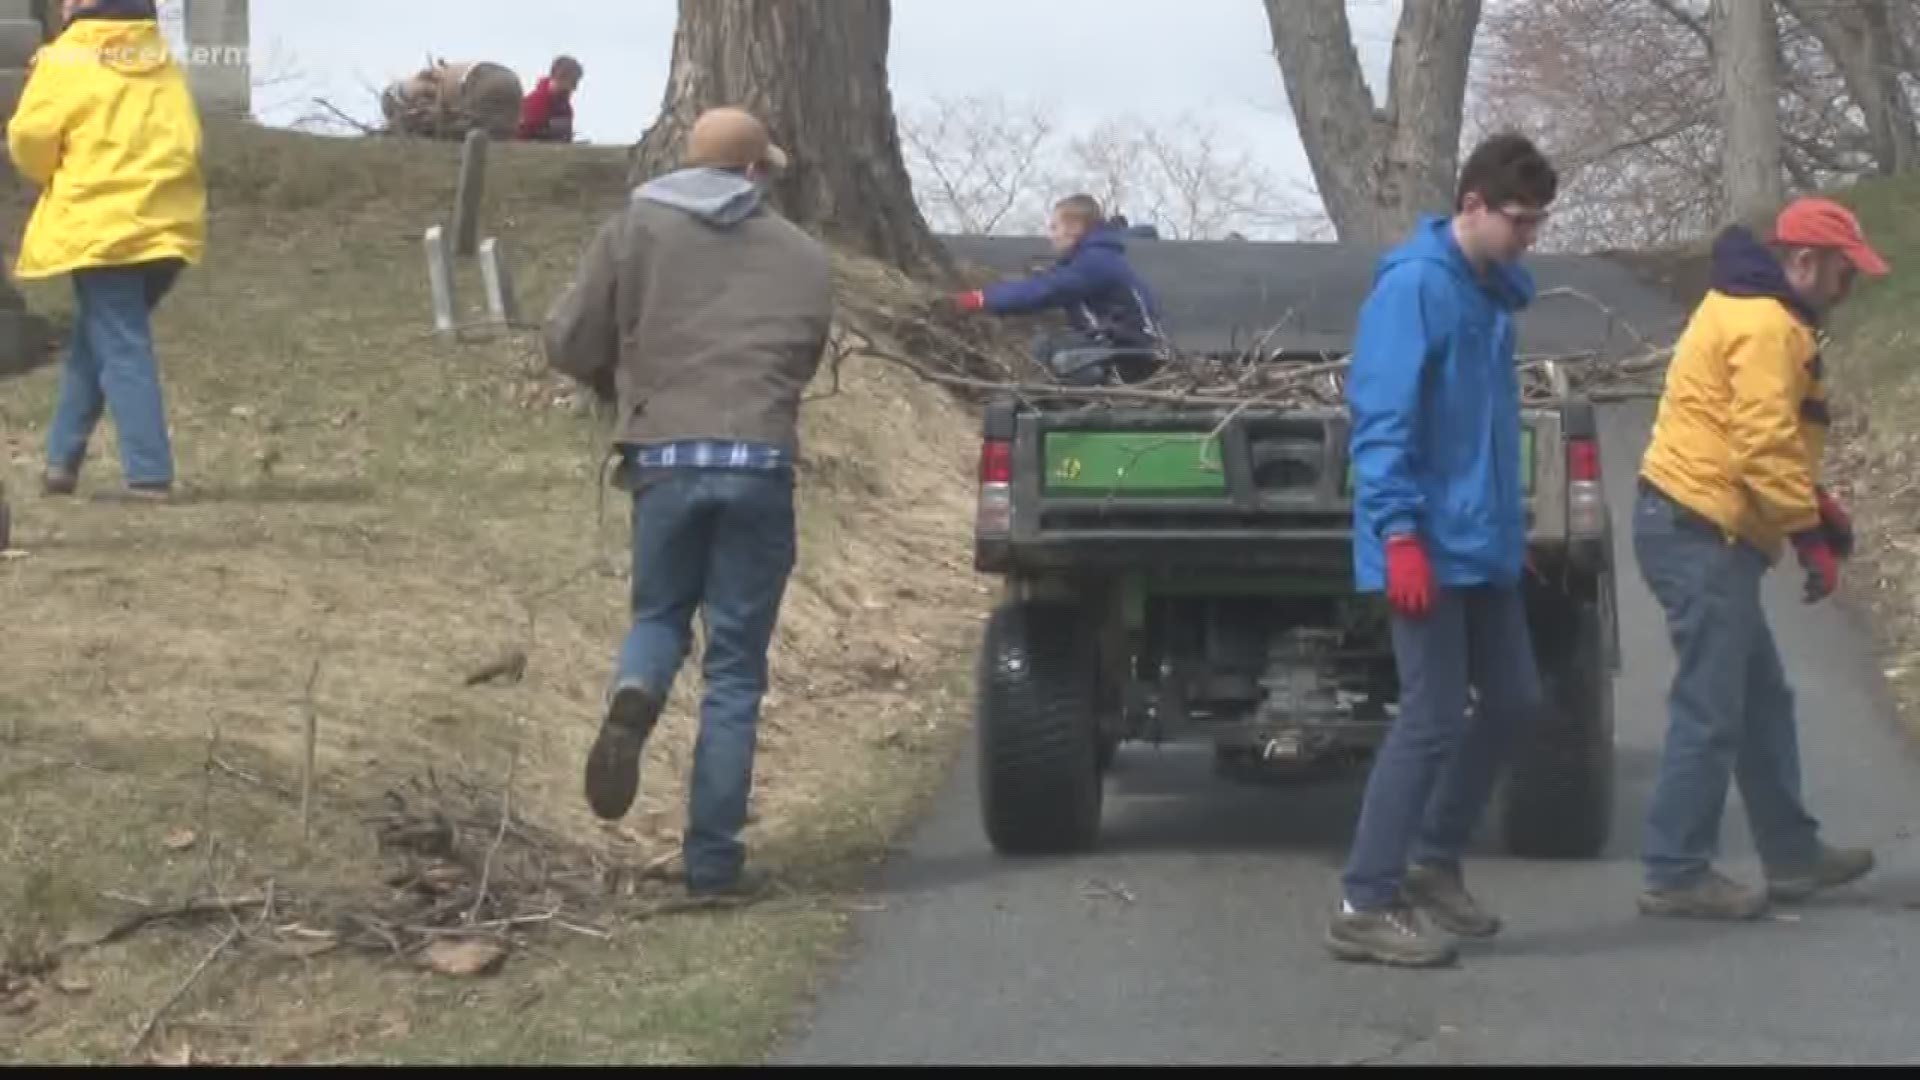 Earth Day cleanup downeast